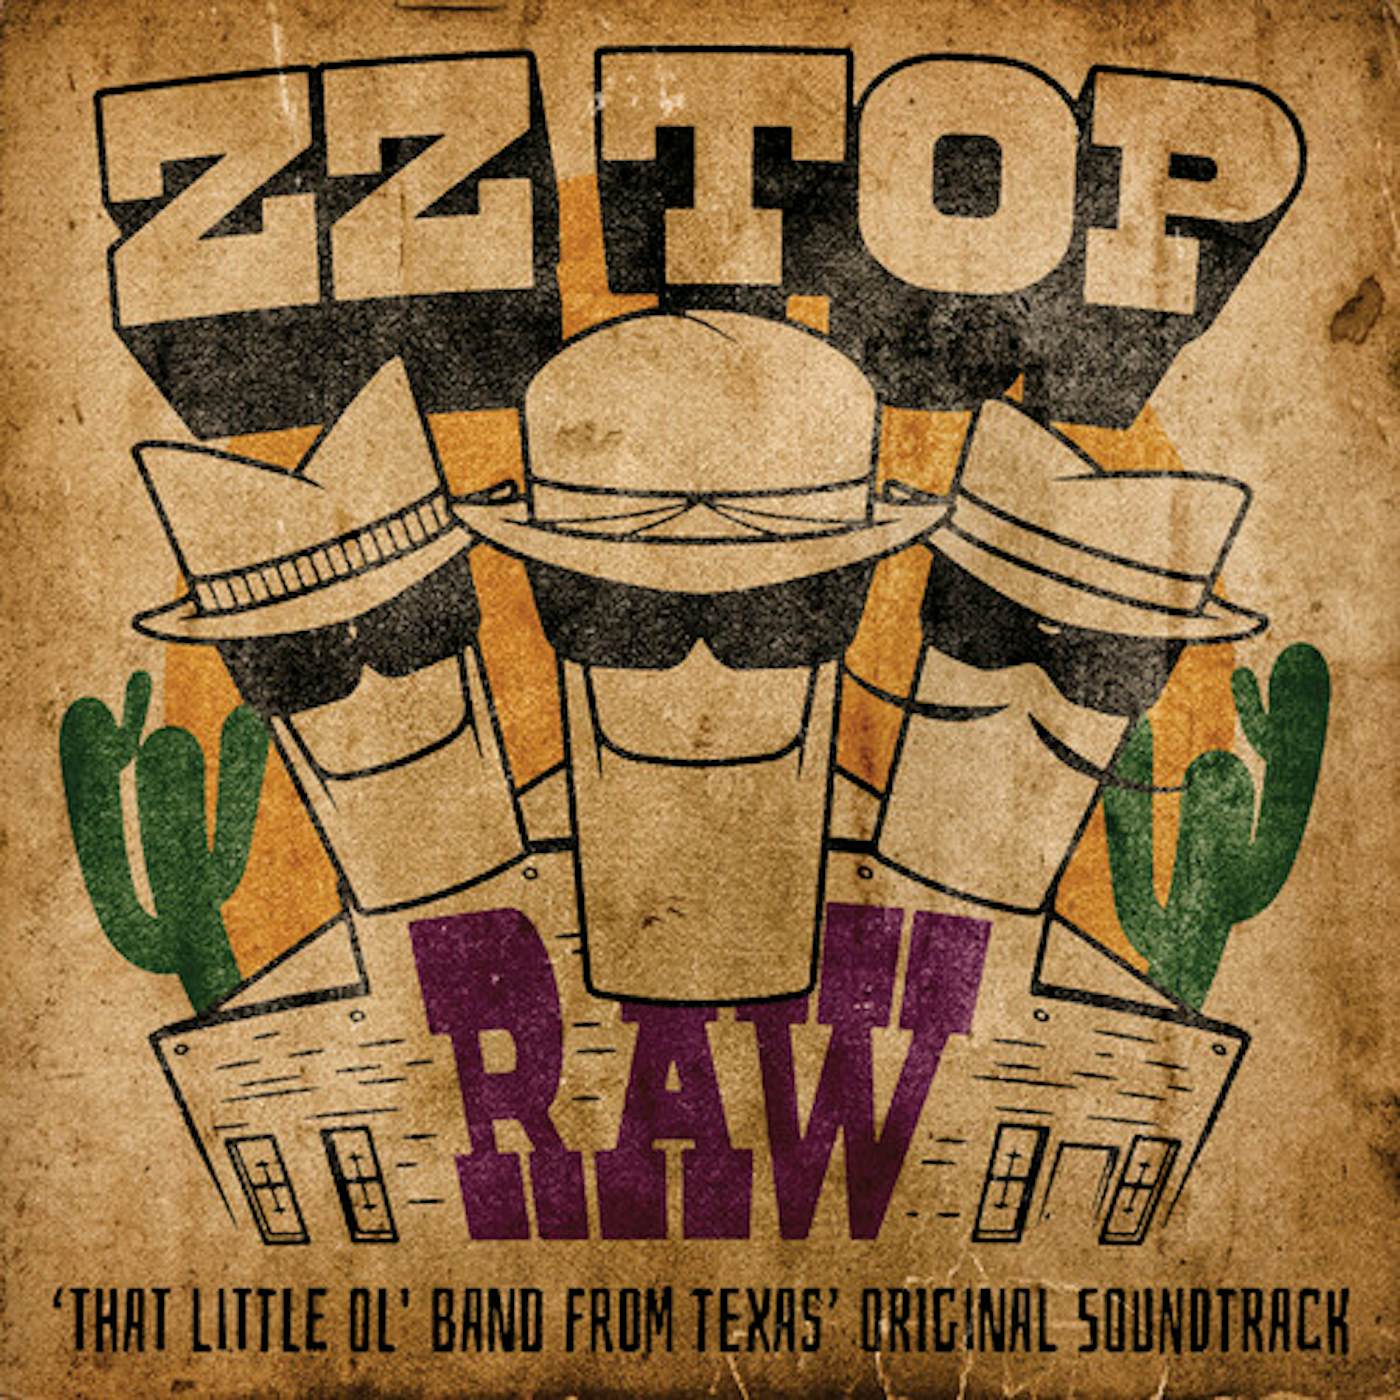 ZZ Top RAW (THAT LITTLE OL' BAND FROM TEXAS) Original Soundtrack CD